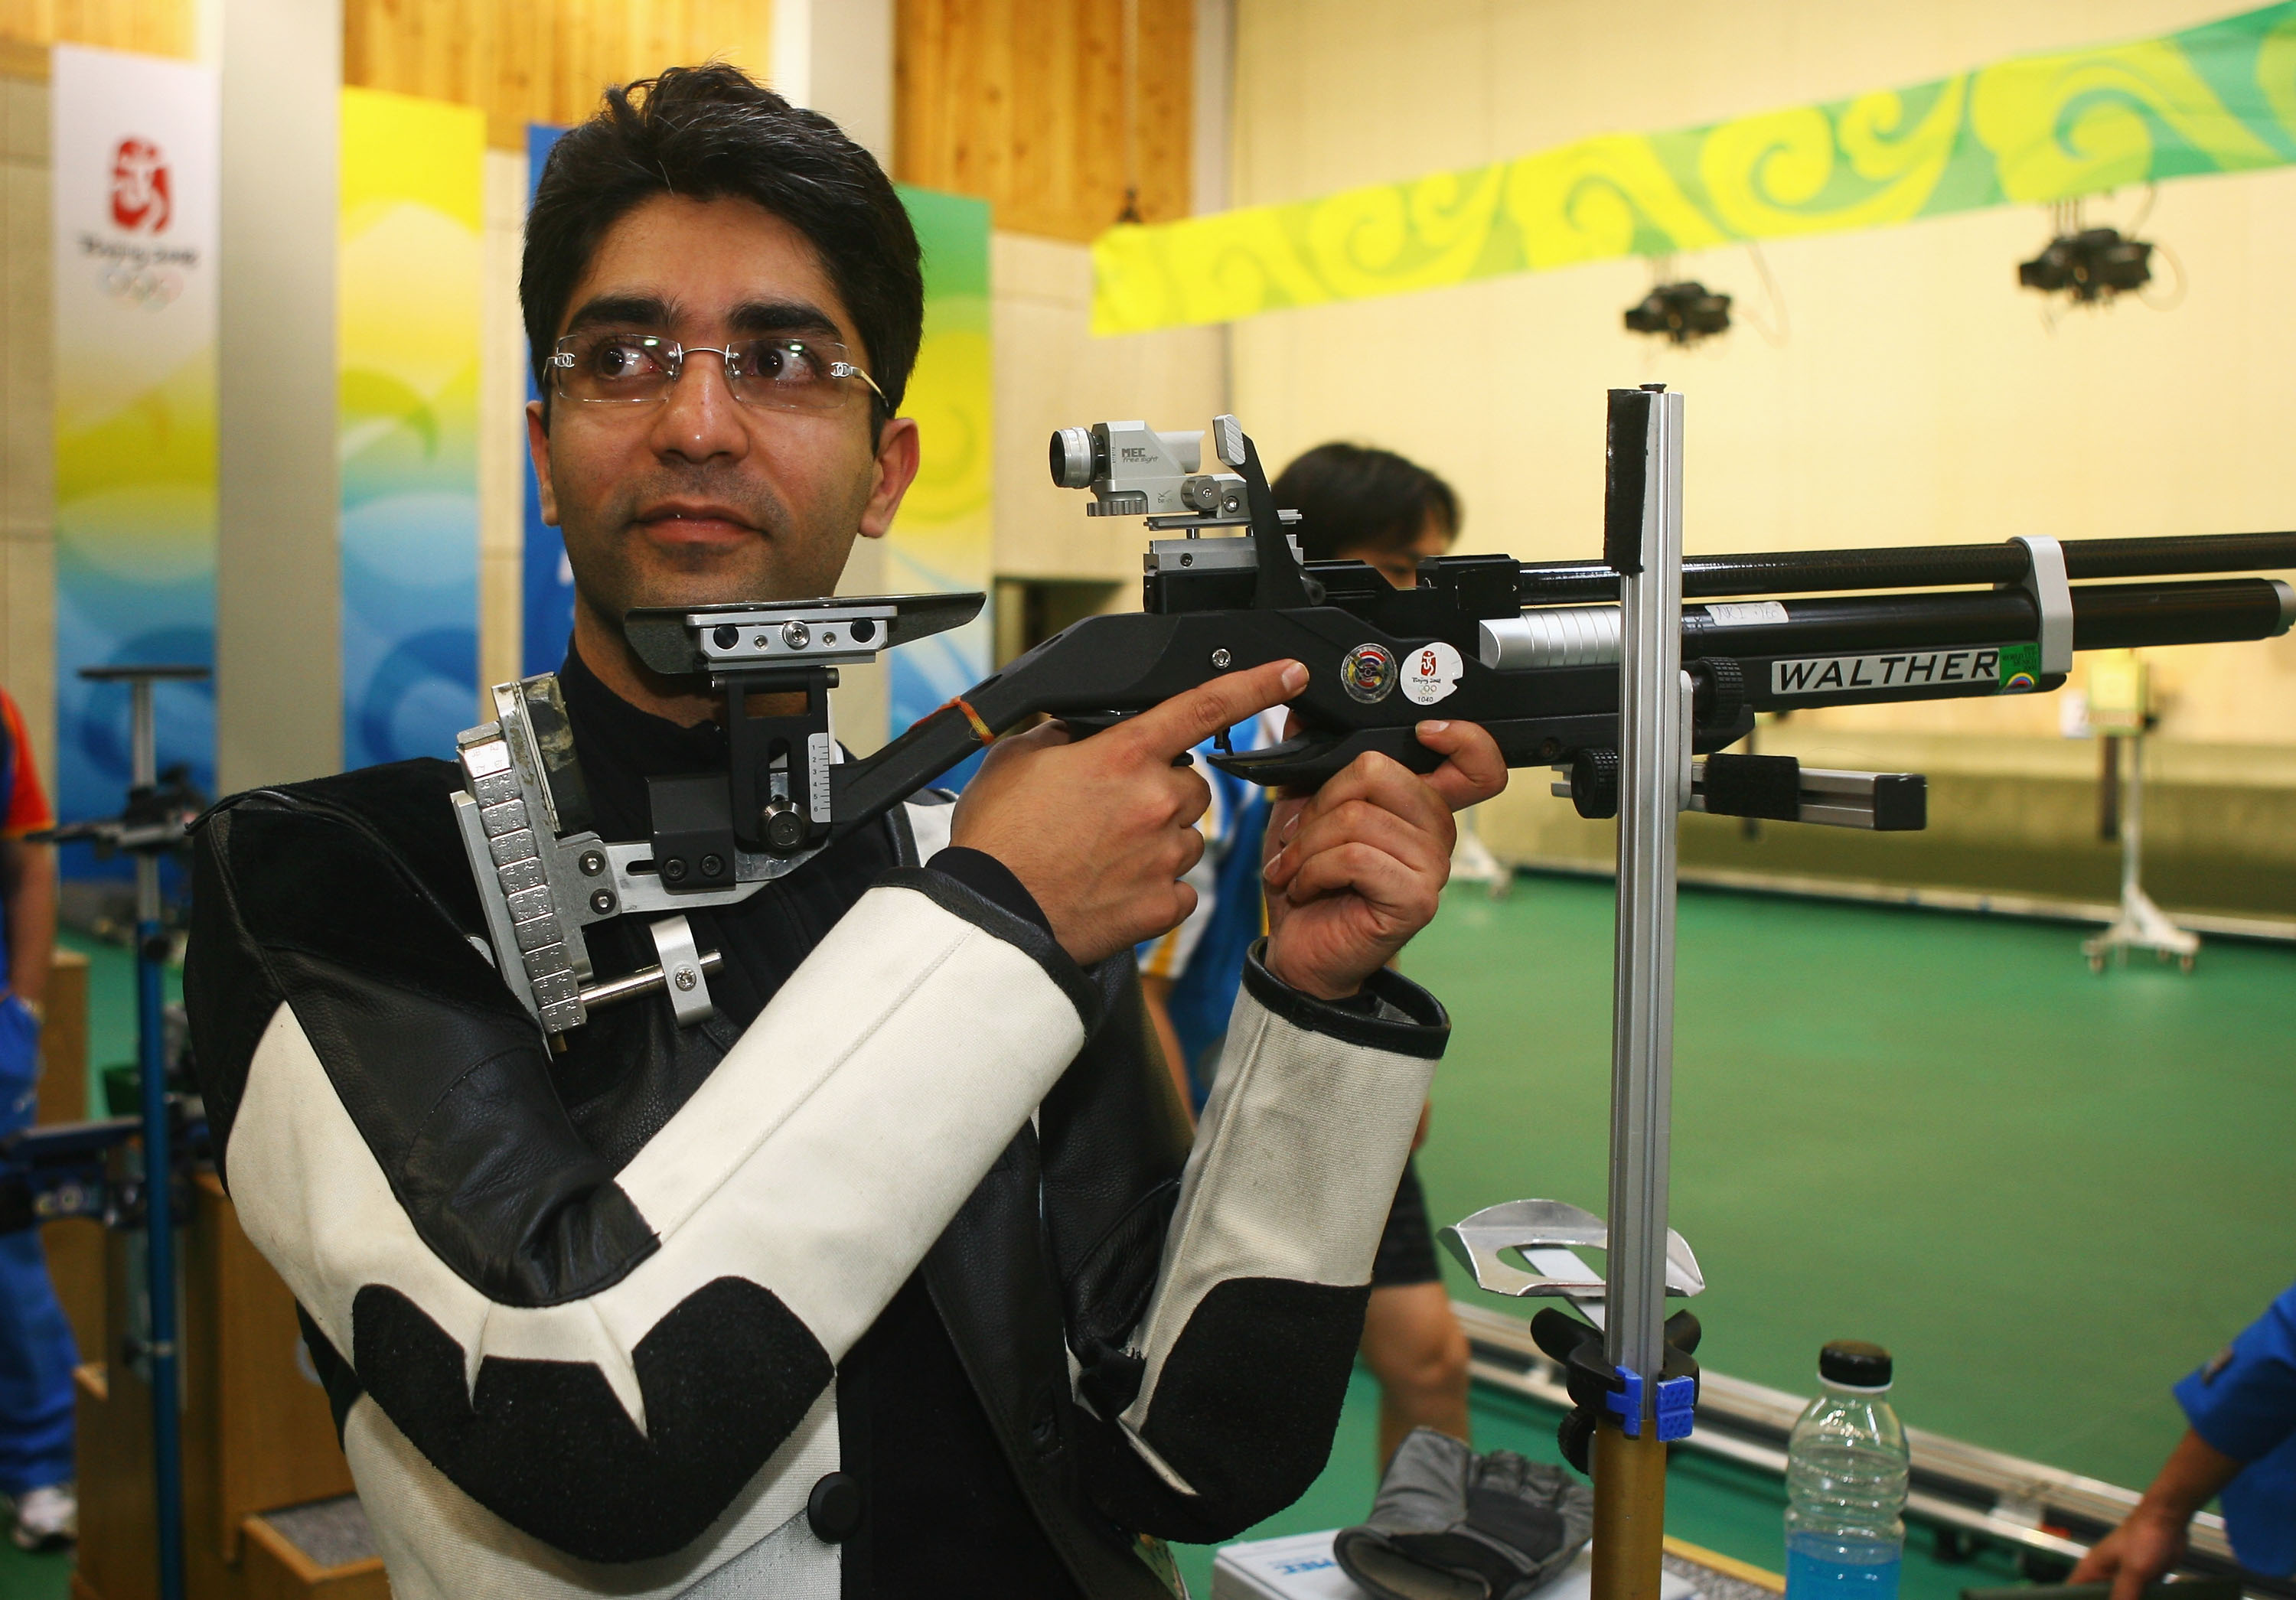 India at Olympic Games today: Olympic medallists Abhinav Bindra and Gagan Narang to lead charge on Day 3